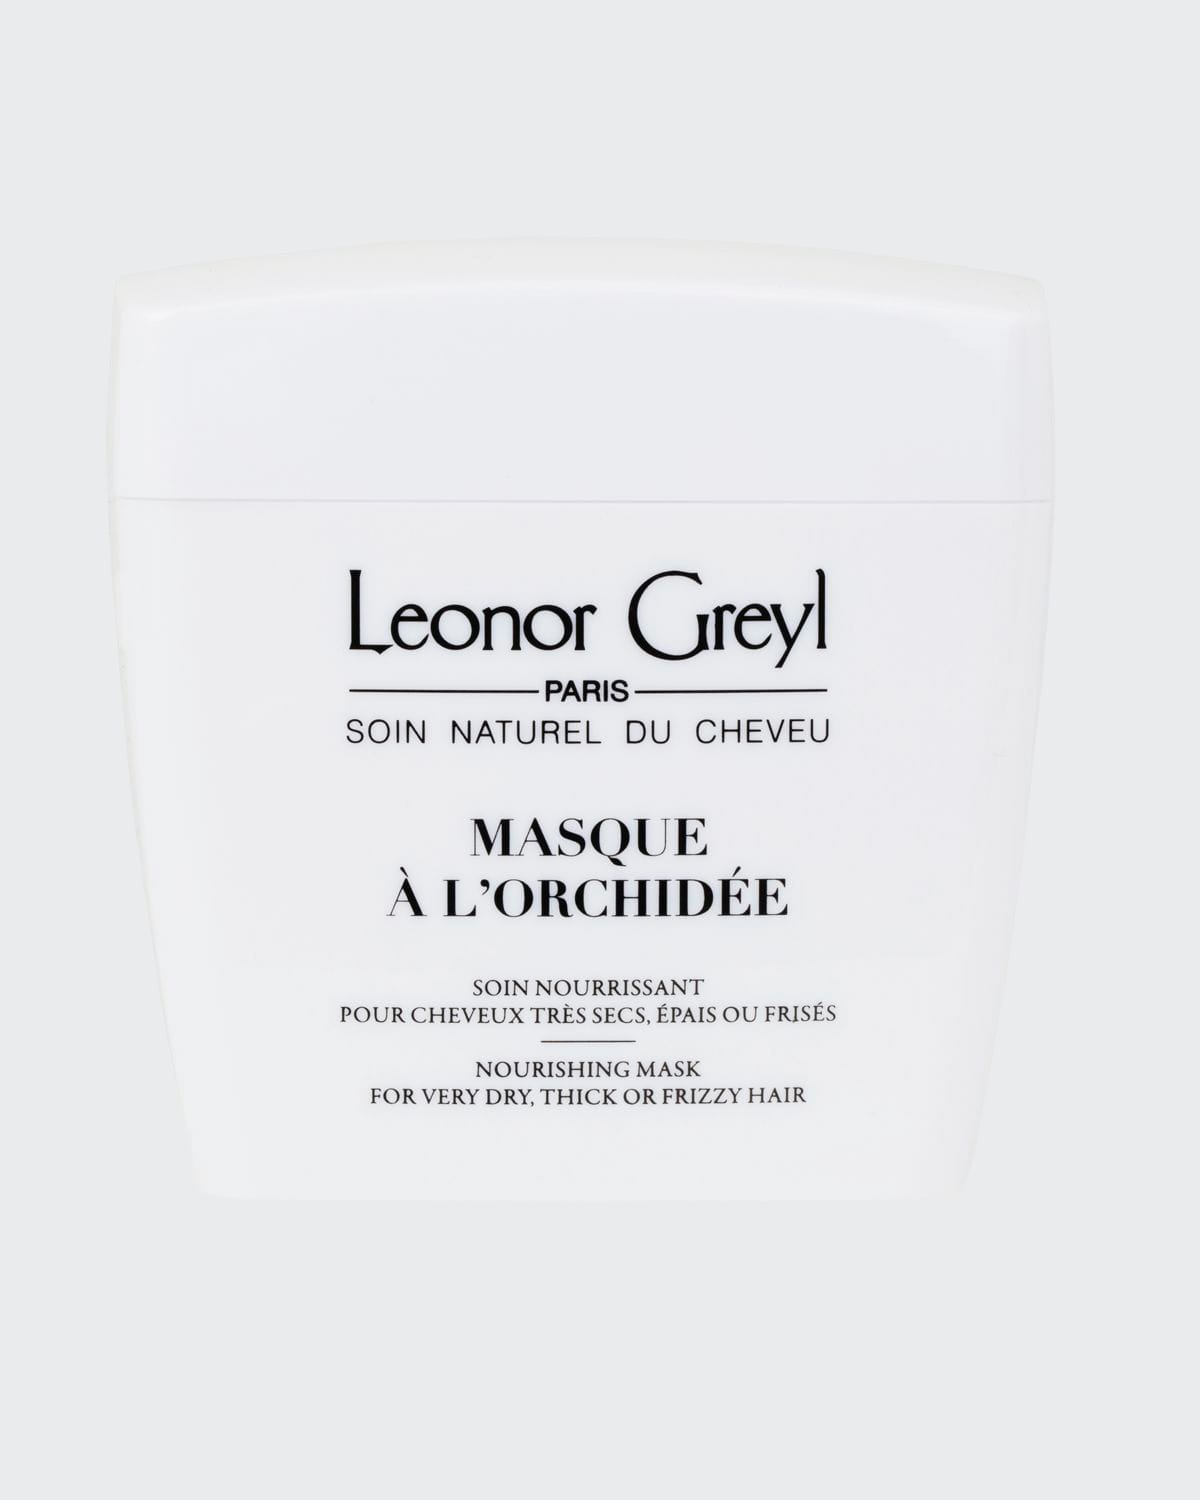 Masque a L'Orchidee (Nourishing Mask for Very Dry, Thick, or Frizzy Hair), 7.0 oz./ 200 mL